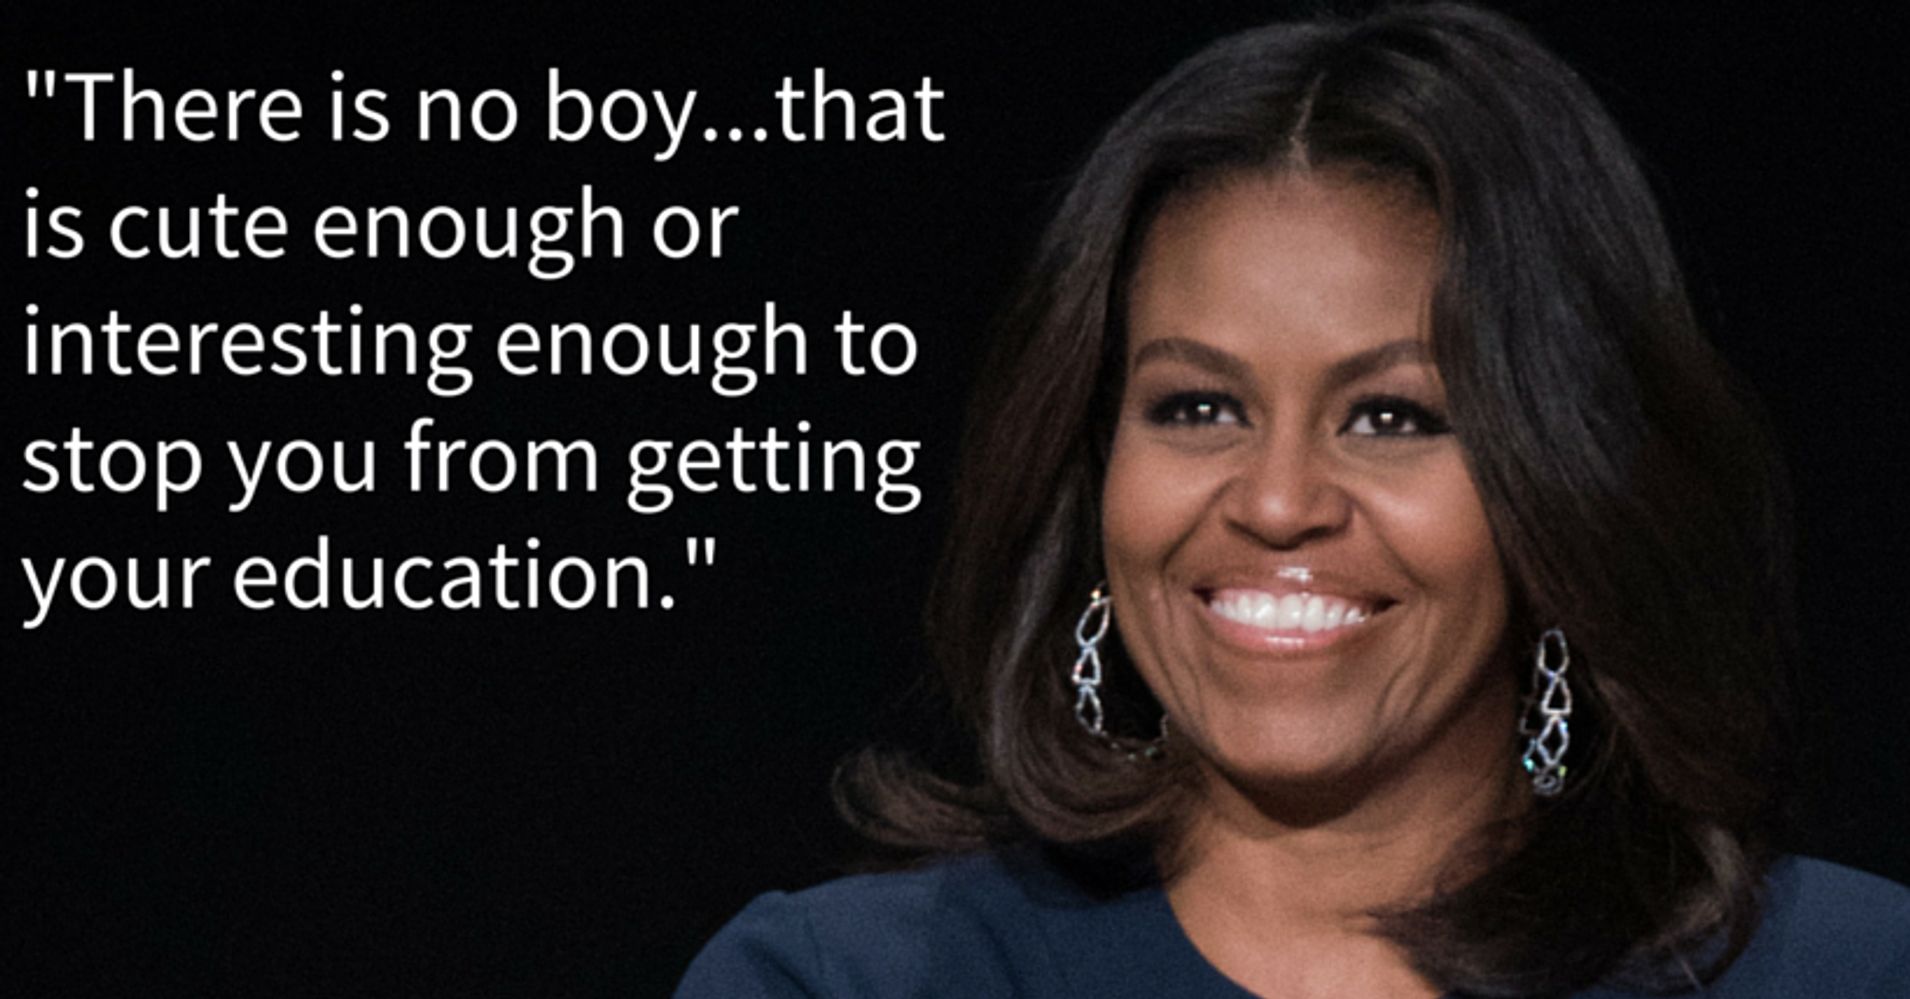 Michelle Obama Dropped Some Wisdom Every Young Girl Should Hear | HuffPost